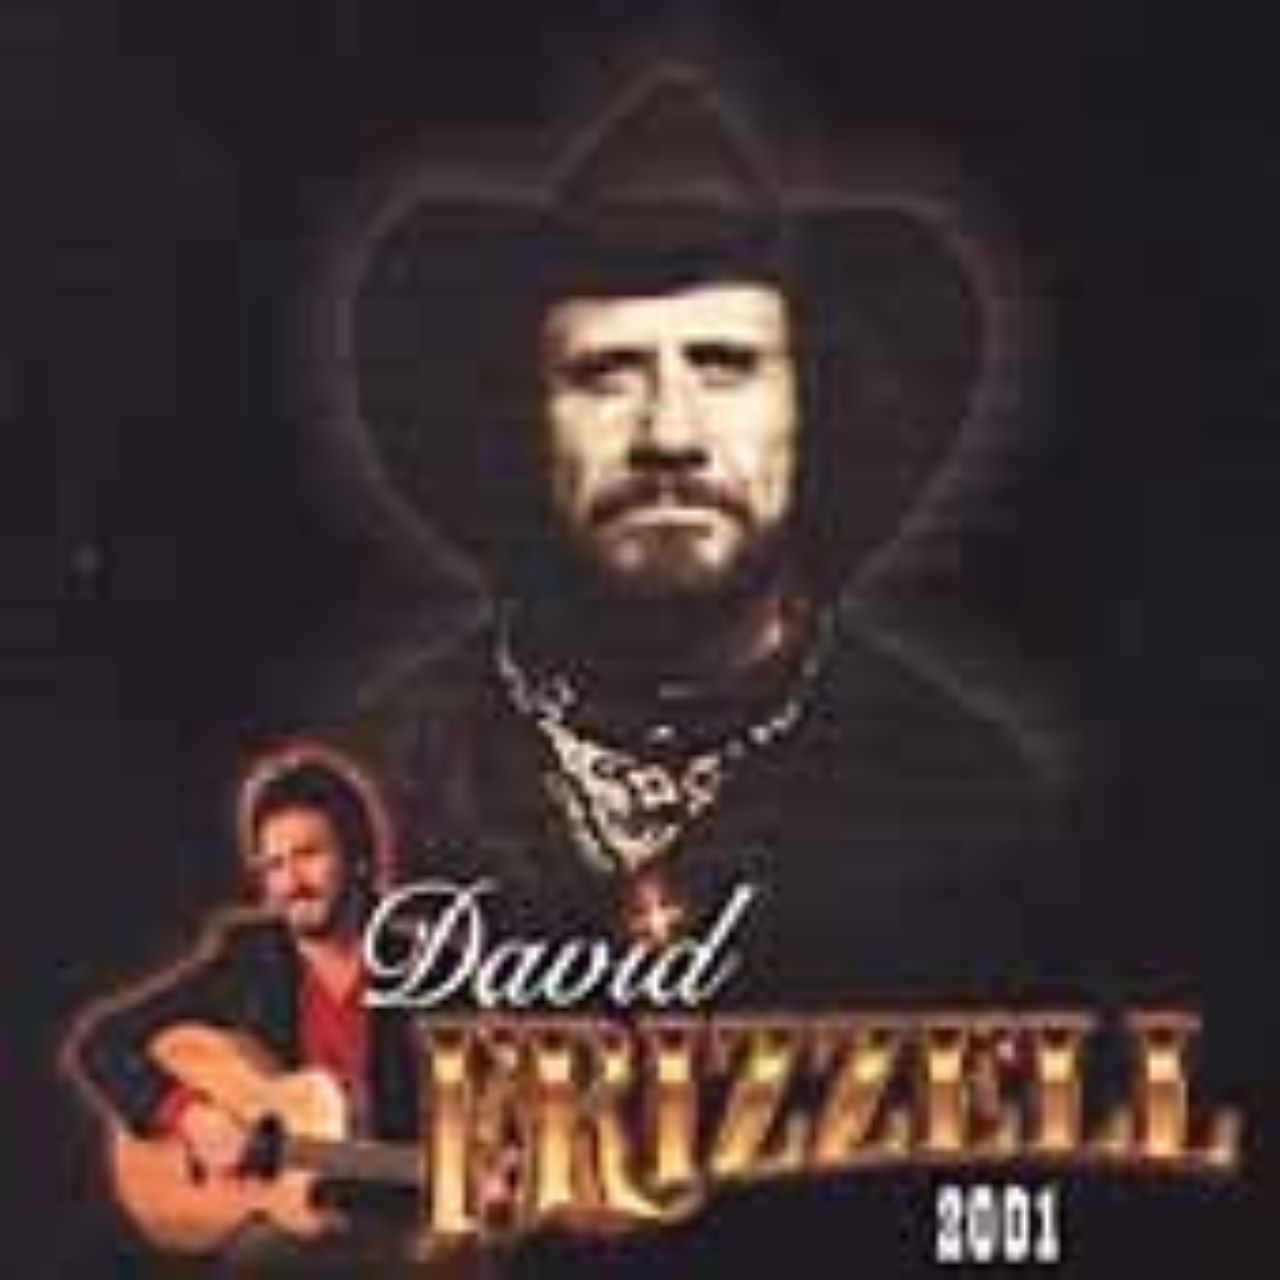 David Frizzell - 2001 cover album